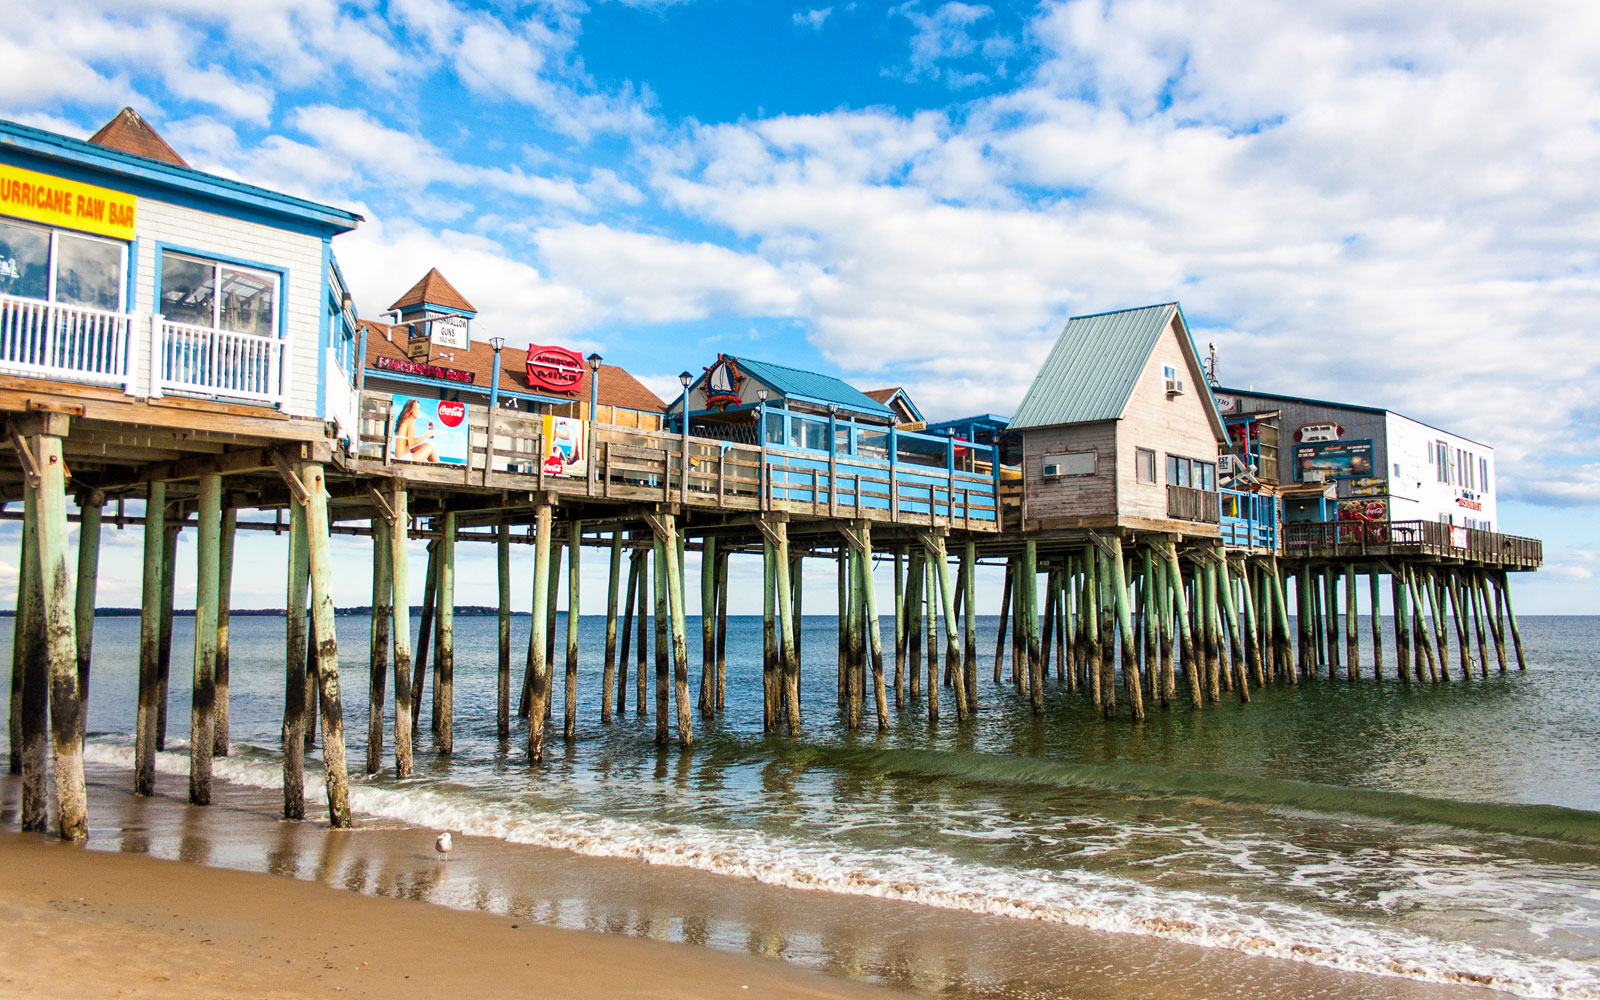 Old Orchard Beach, Maine